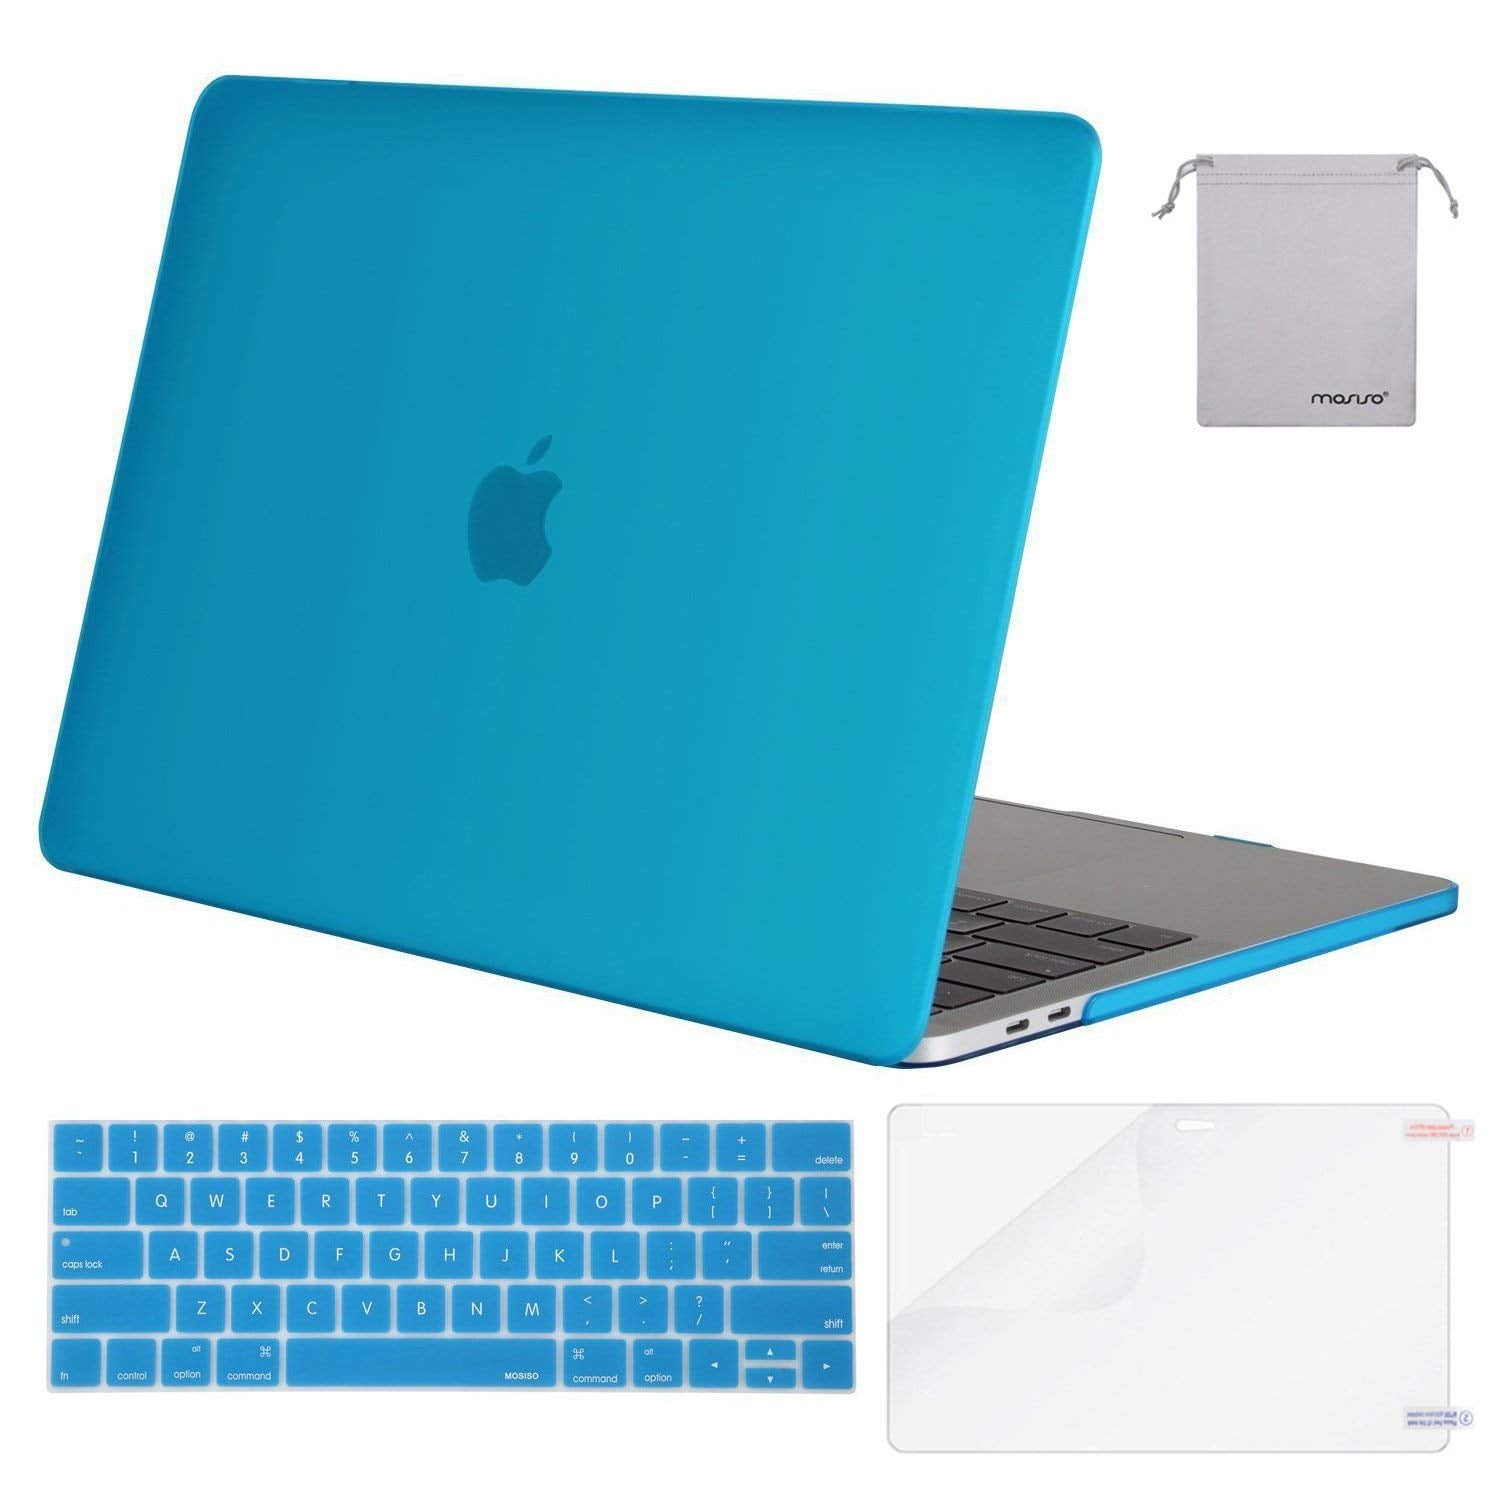 Plastic Hard Shell &Keyboard Cover &Screen Protector &Storage Bag Compatible with MacBook Pro 13 Wine Red MOSISO MacBook Pro 13 inch Case 2019 2018 2017 2016 Release A2159 A1989 A1706 A1708 